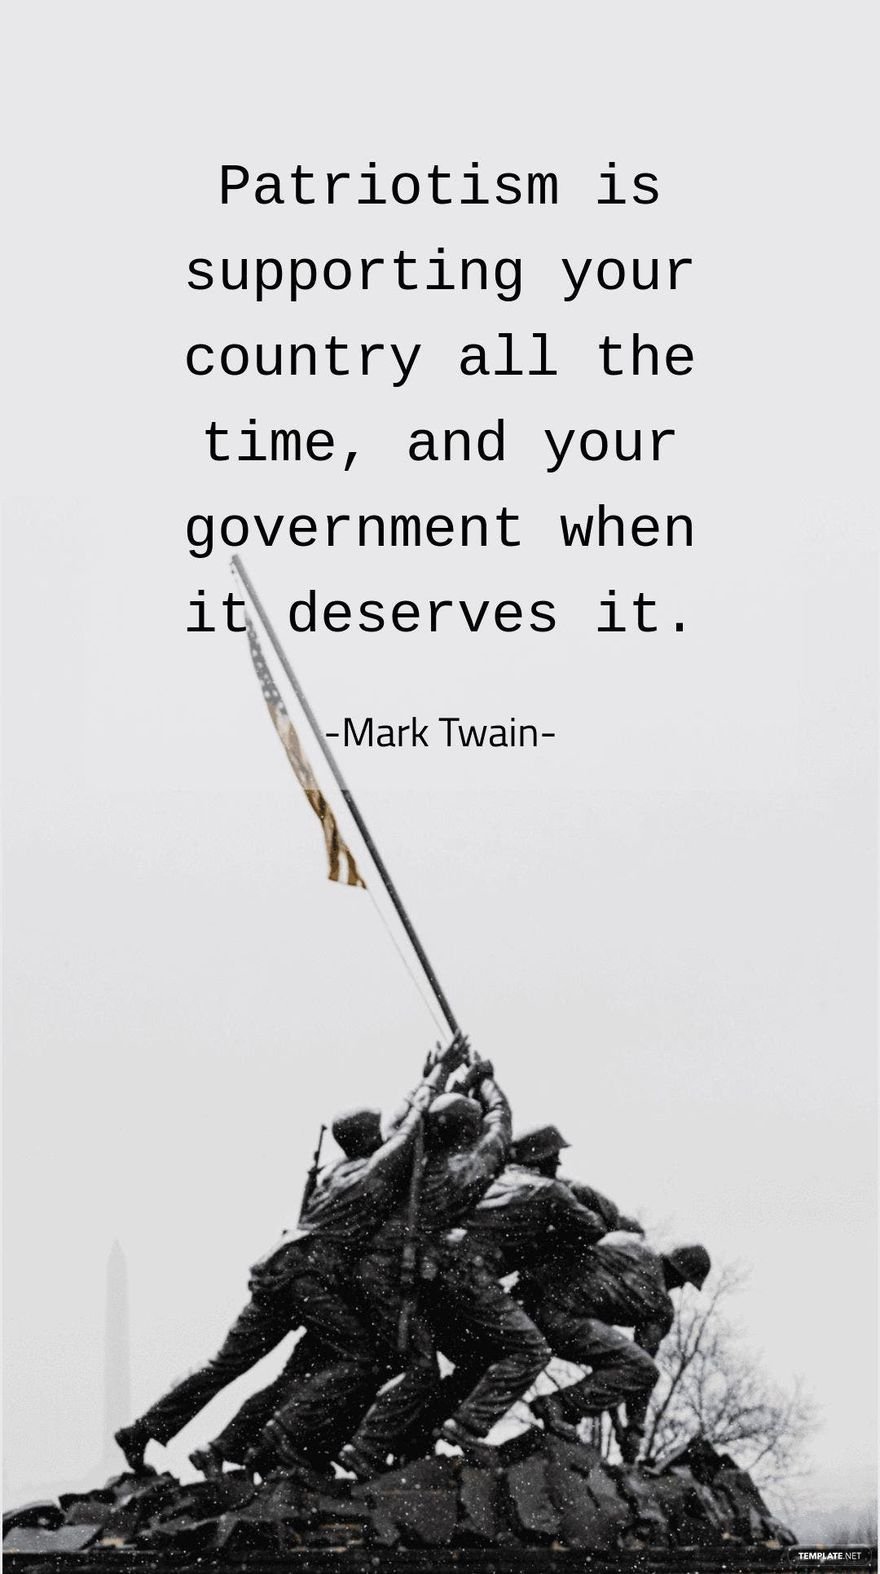 Free Mark Twain - Patriotism is supporting your country all the time, and your government when it deserves it. in JPG